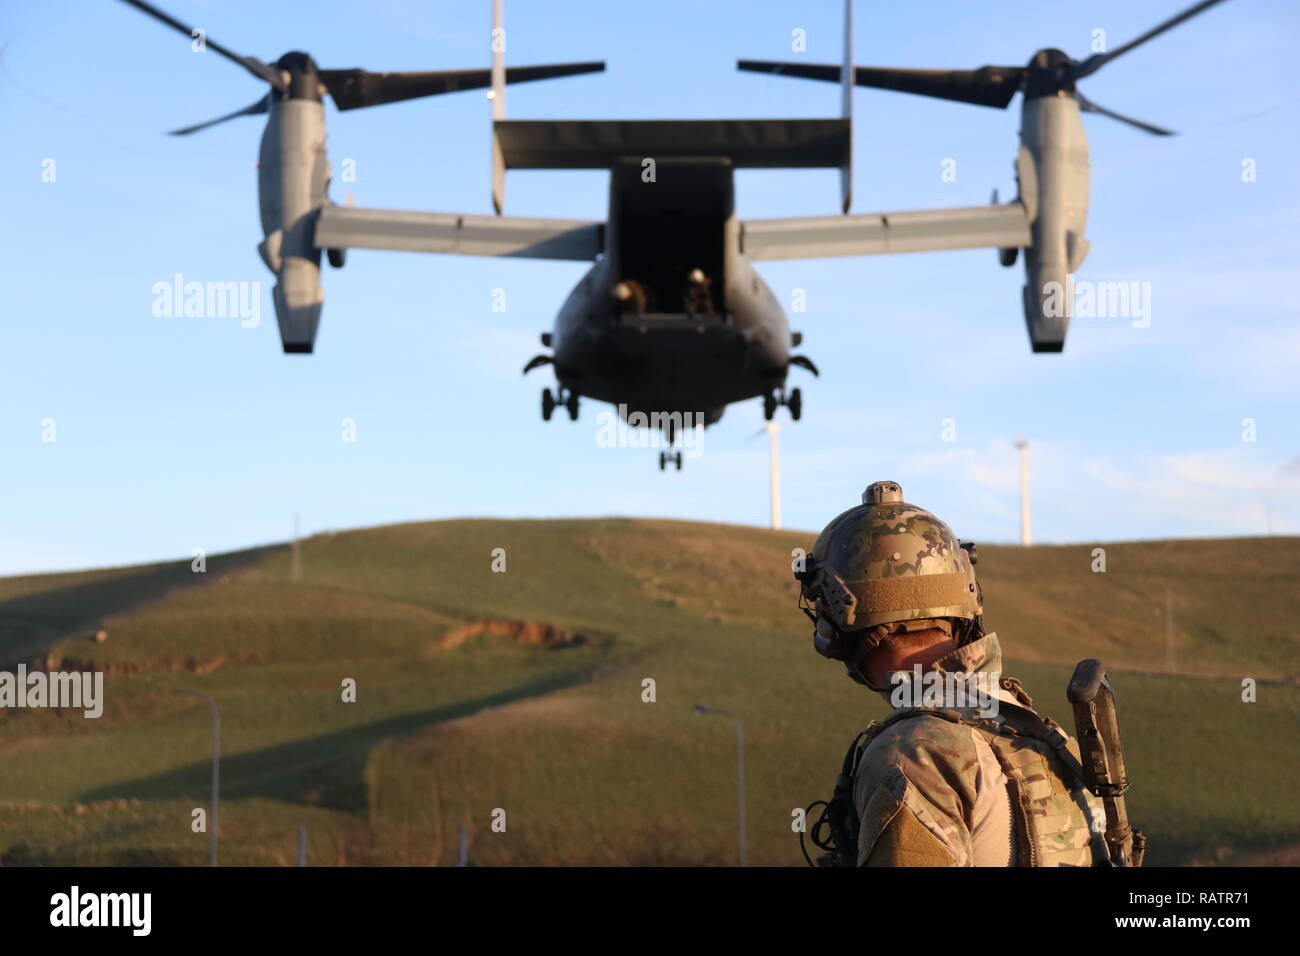 A U.S. Air Force Pararescue Jumper attached to Special Purpose Marine Air-Ground Task Force-Crisis Response-Africa 19.1 rehearses hoist-rescue operations on and off an MV-22 Osprey at Naval Air Station Sigonella, Italy, Dec. 20, 2018. SPMAGTF-CR-AF is deployed to conduct crisis-response and theater-security operations in Europe and Africa. (U.S. Marine Corps photo by 1stLt Christin St. John) Stock Photo